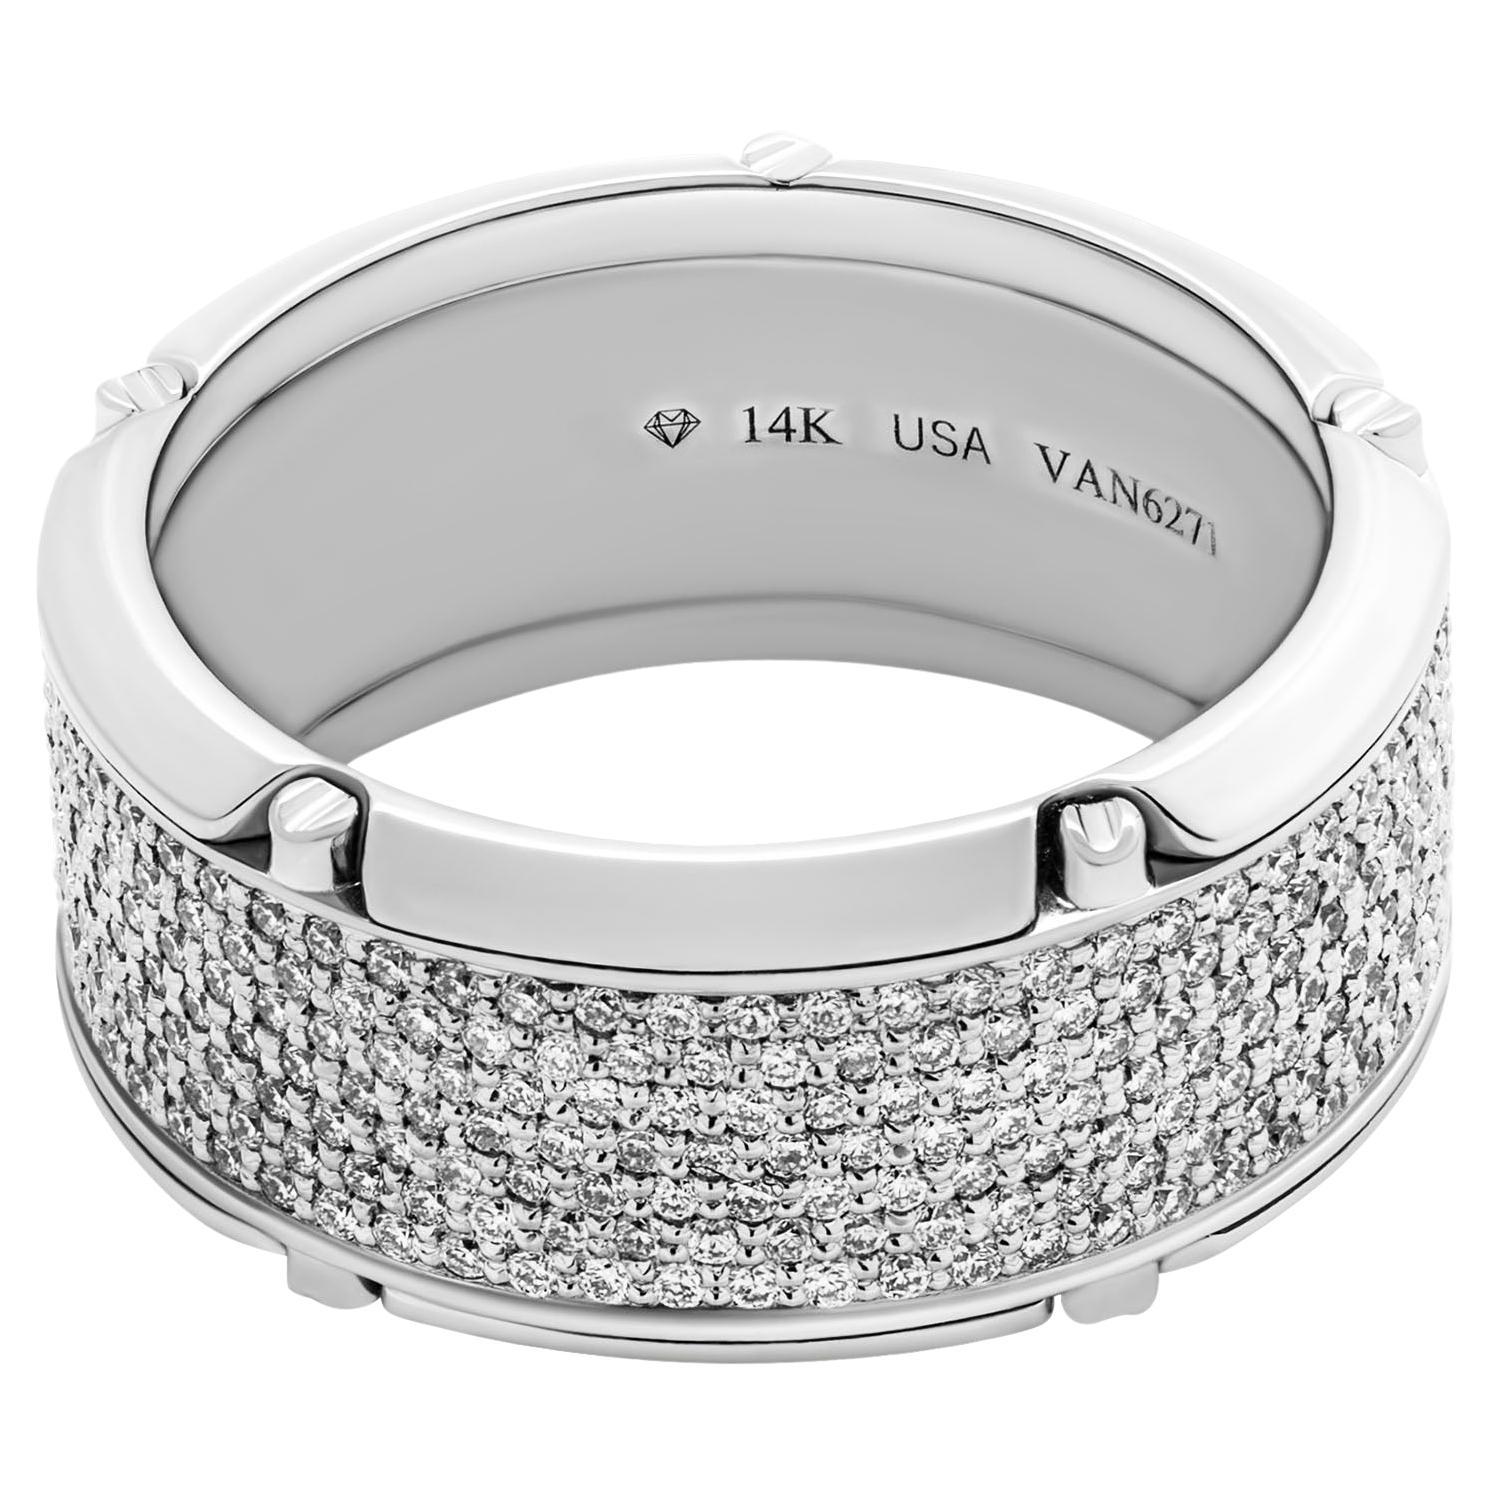 Mans Pave Band in 14k WG with diamonds
Size: 10.75
Total Carat Weight :1.89ct F/G Color VS Clarity
420st
